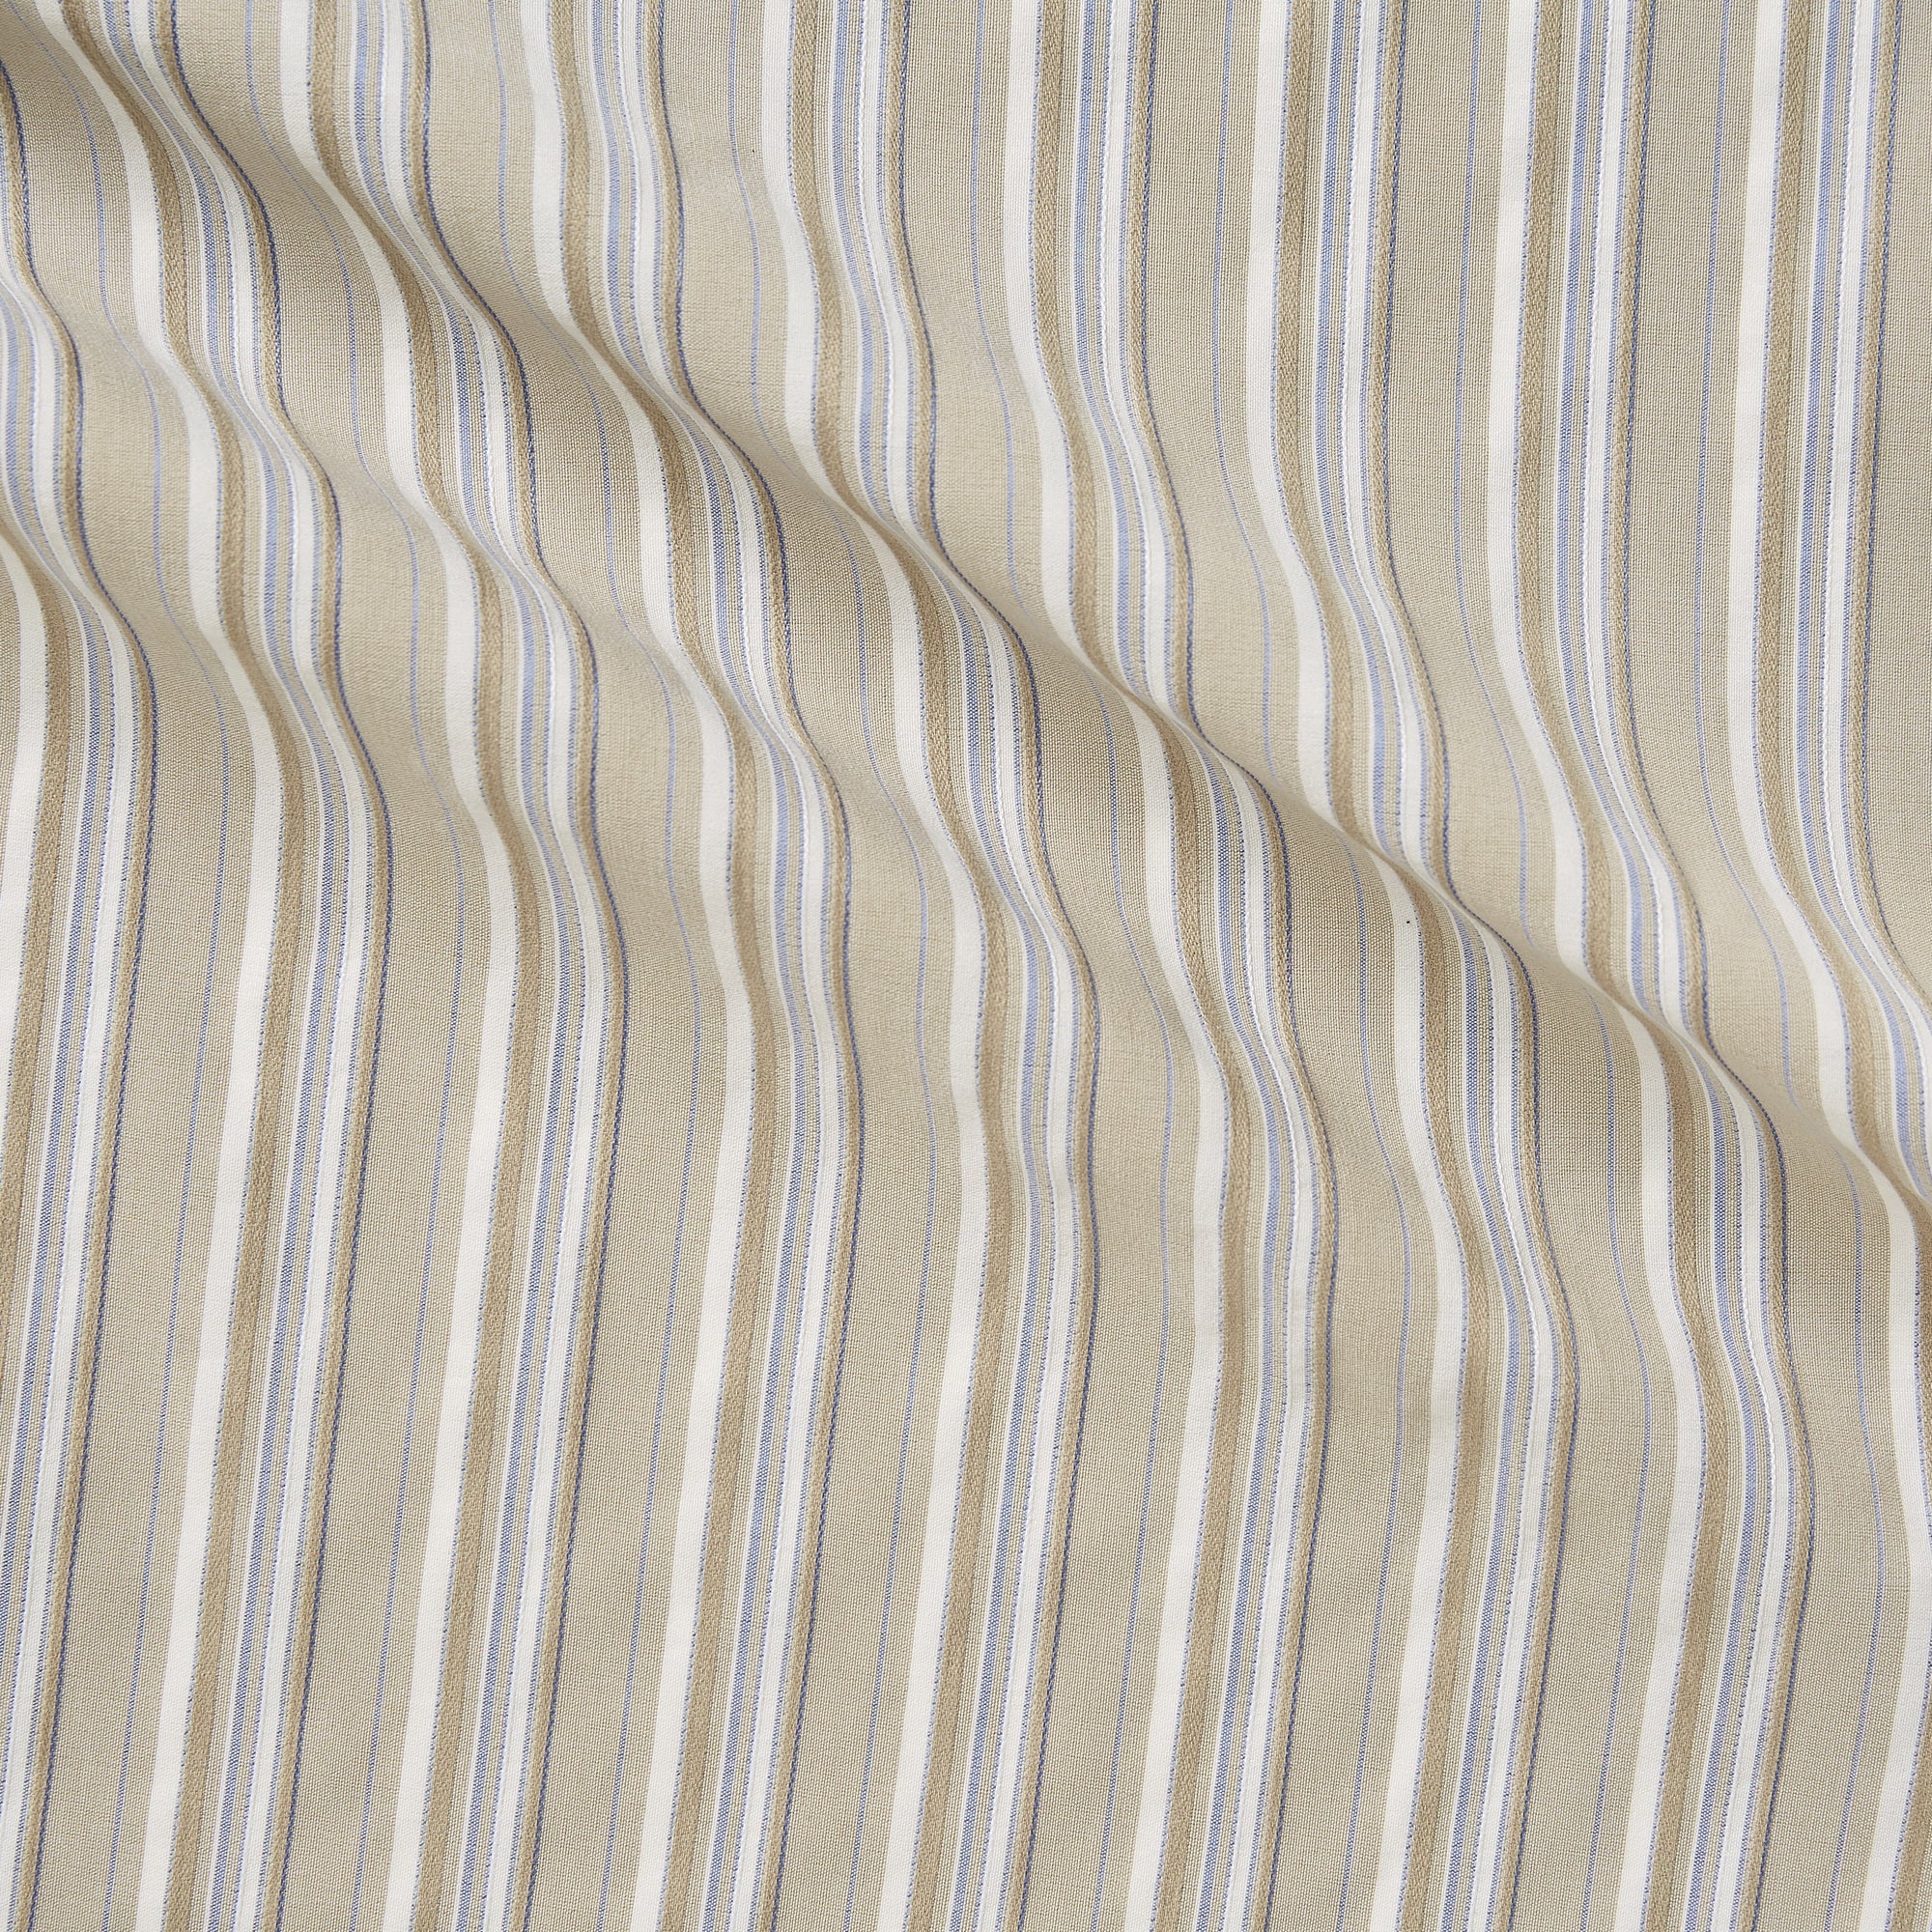 amalfi presenting the stone colored version with shadow stripes on stretch crisp rayon and polyester with spandex featuring moderate drape